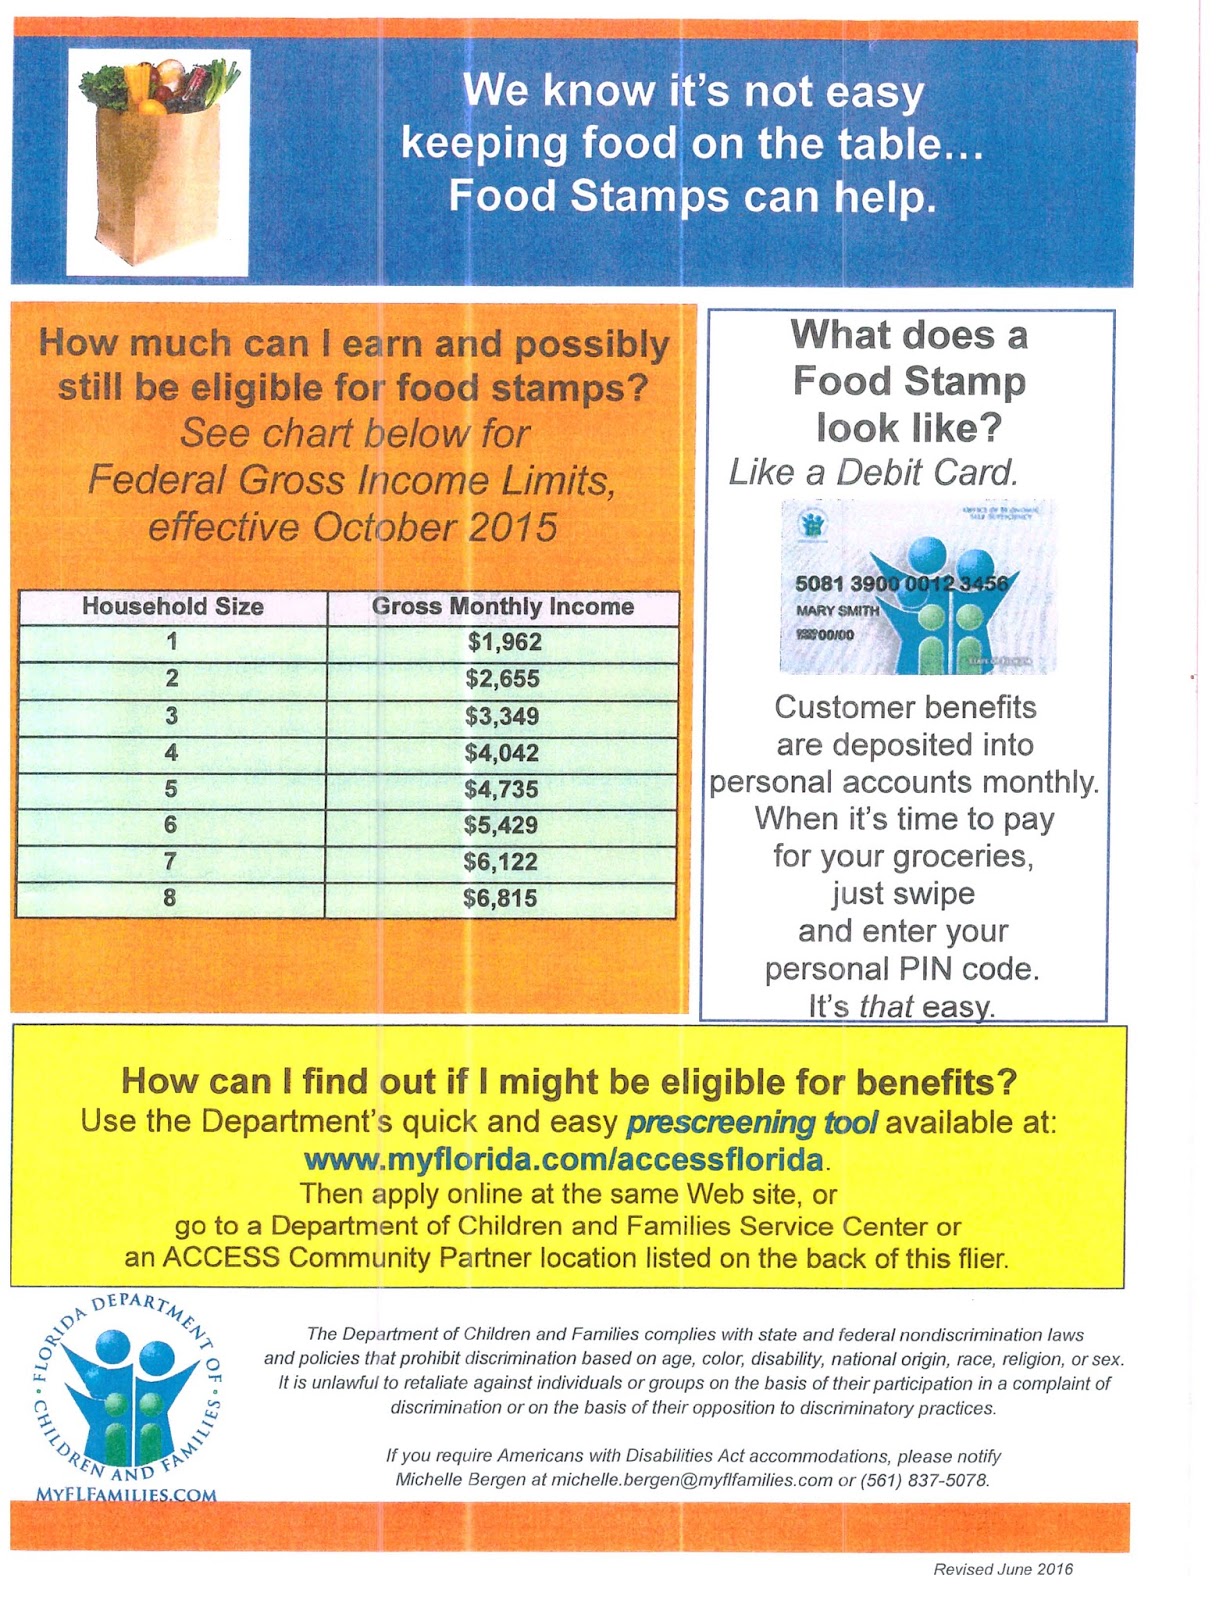 SNAP Food Stamps Eligibility Screening Tool